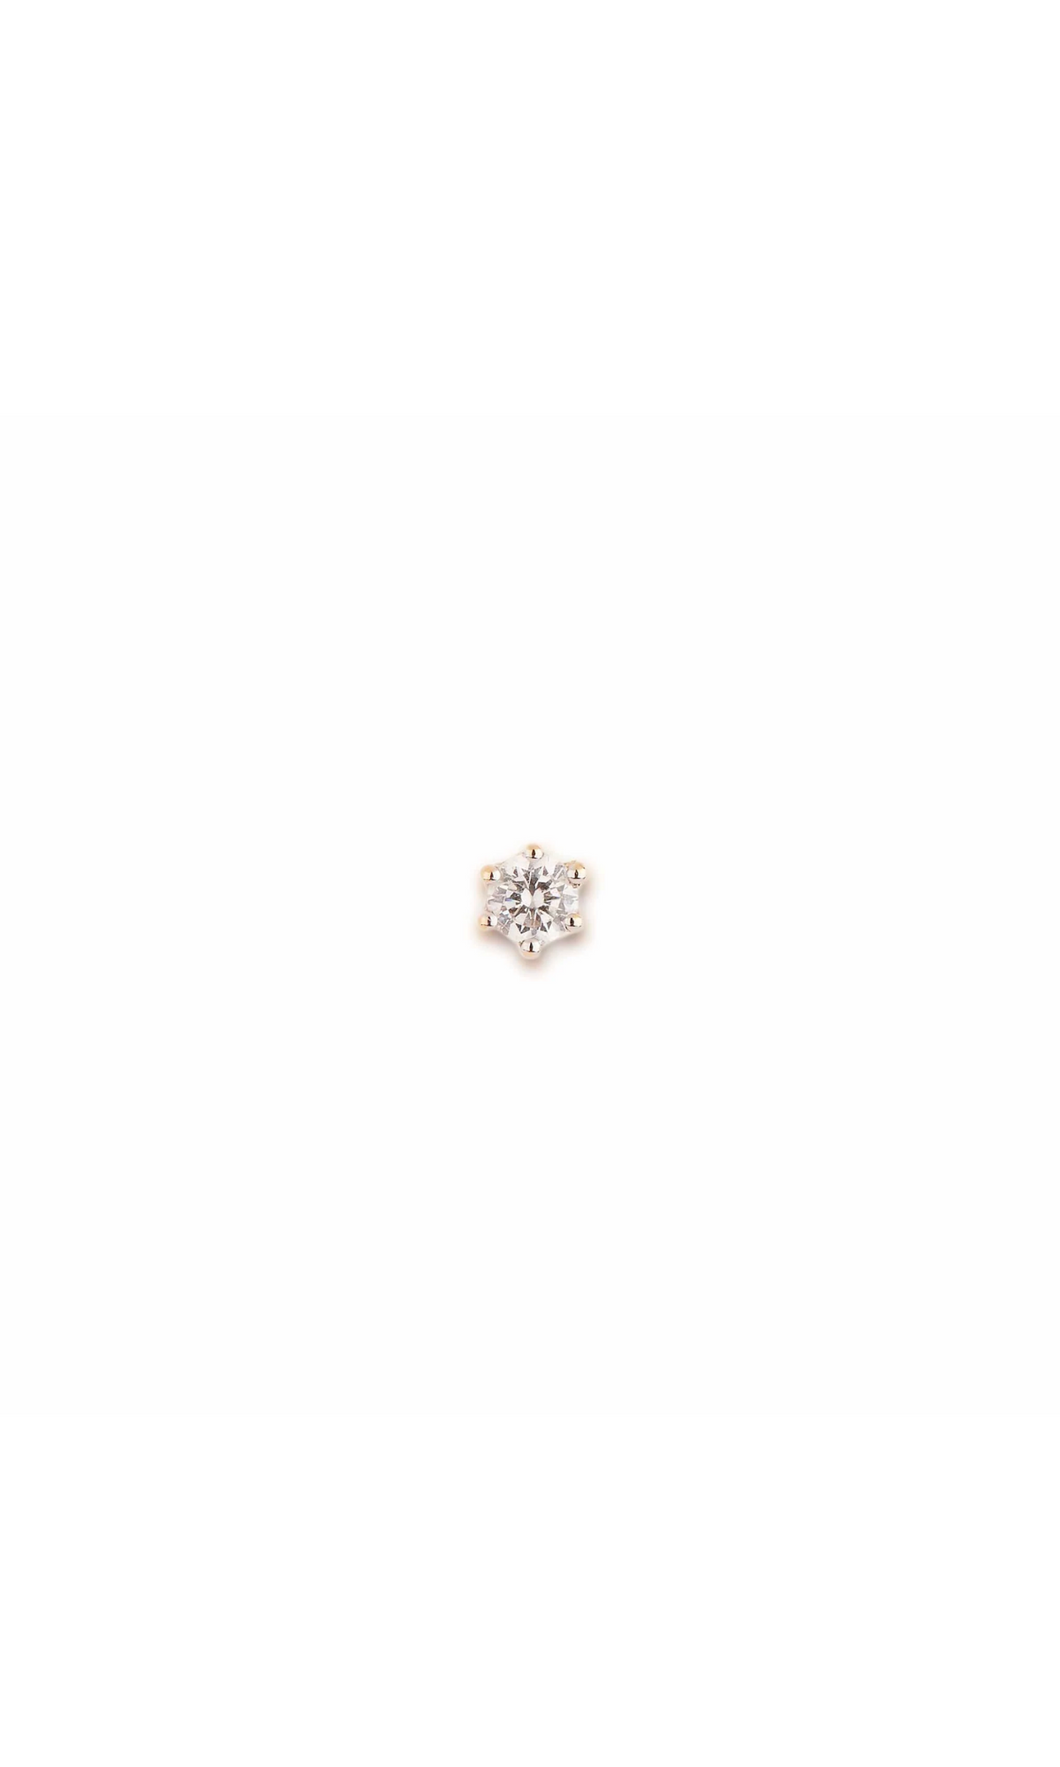 BY CHARLOTTE | Tiny Crystal Stud